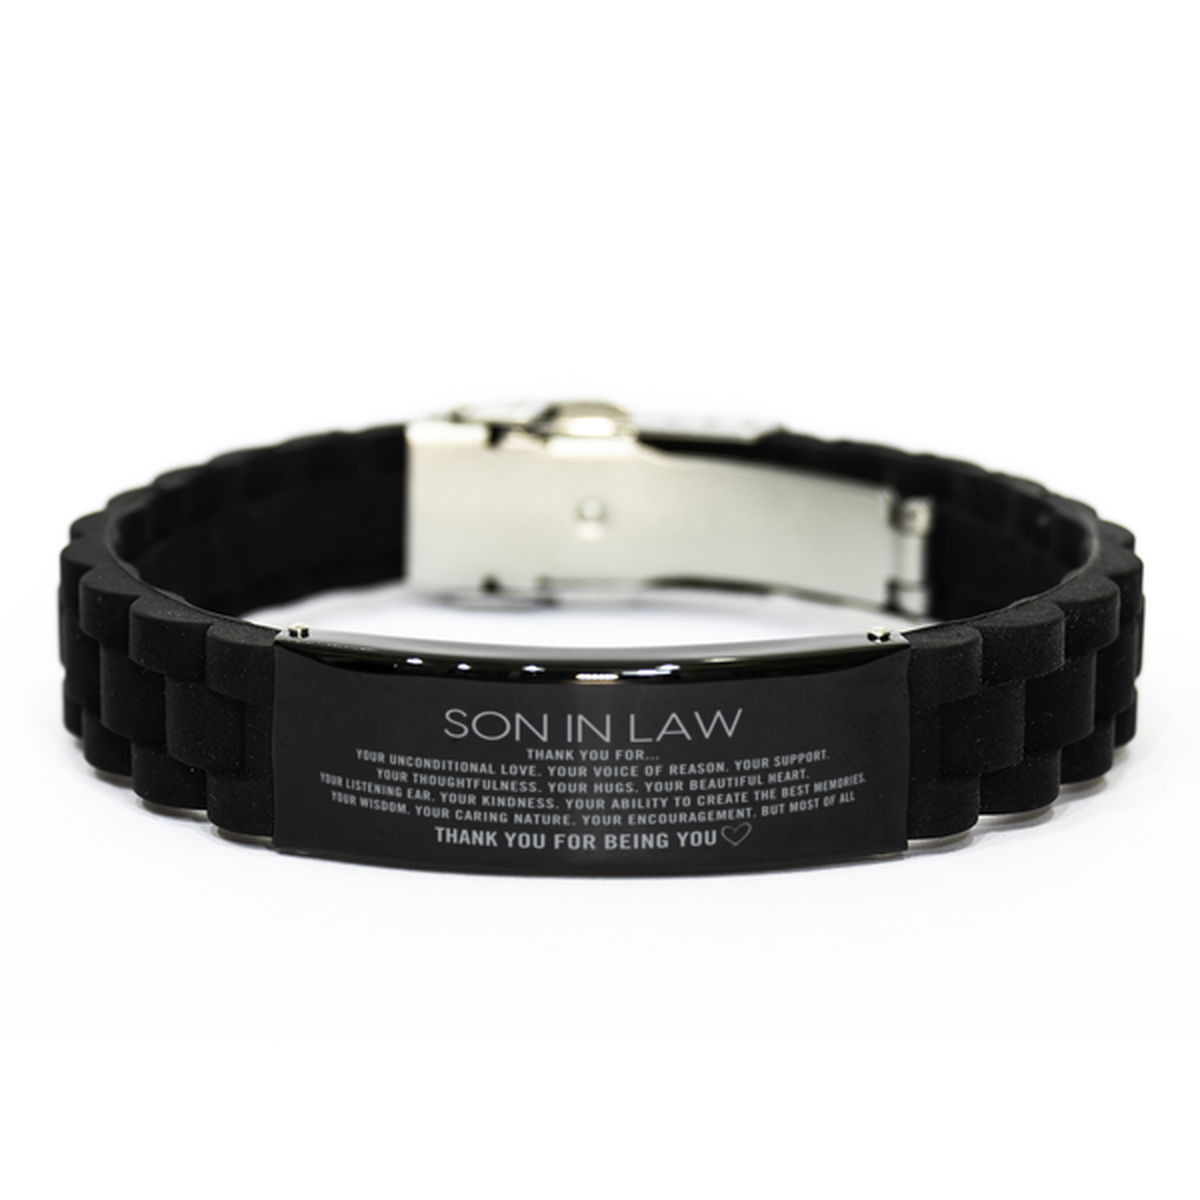 Son In Law Black Glidelock Clasp Bracelet Custom, Engraved Gifts For Son In Law Christmas Graduation Birthday Gifts for Men Women Son In Law Thank you for Your unconditional love